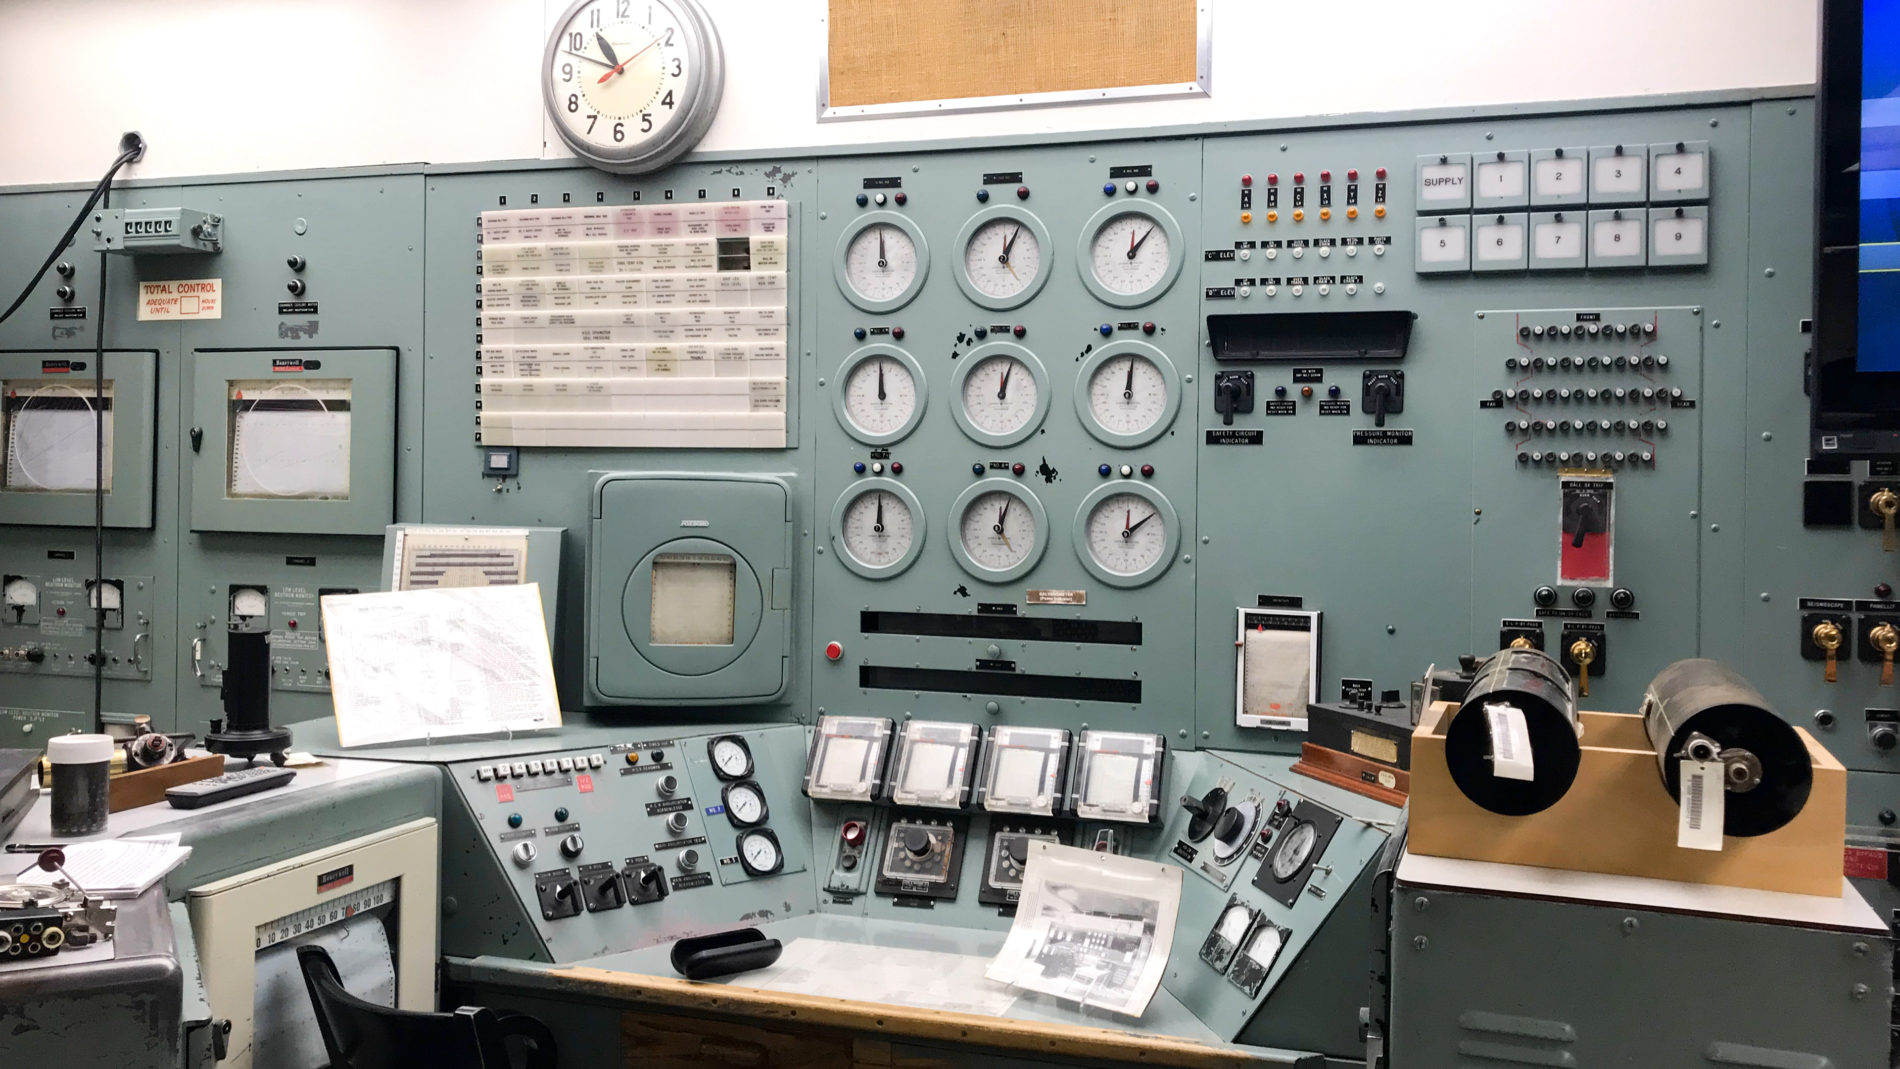 The control room in the B Reactor.